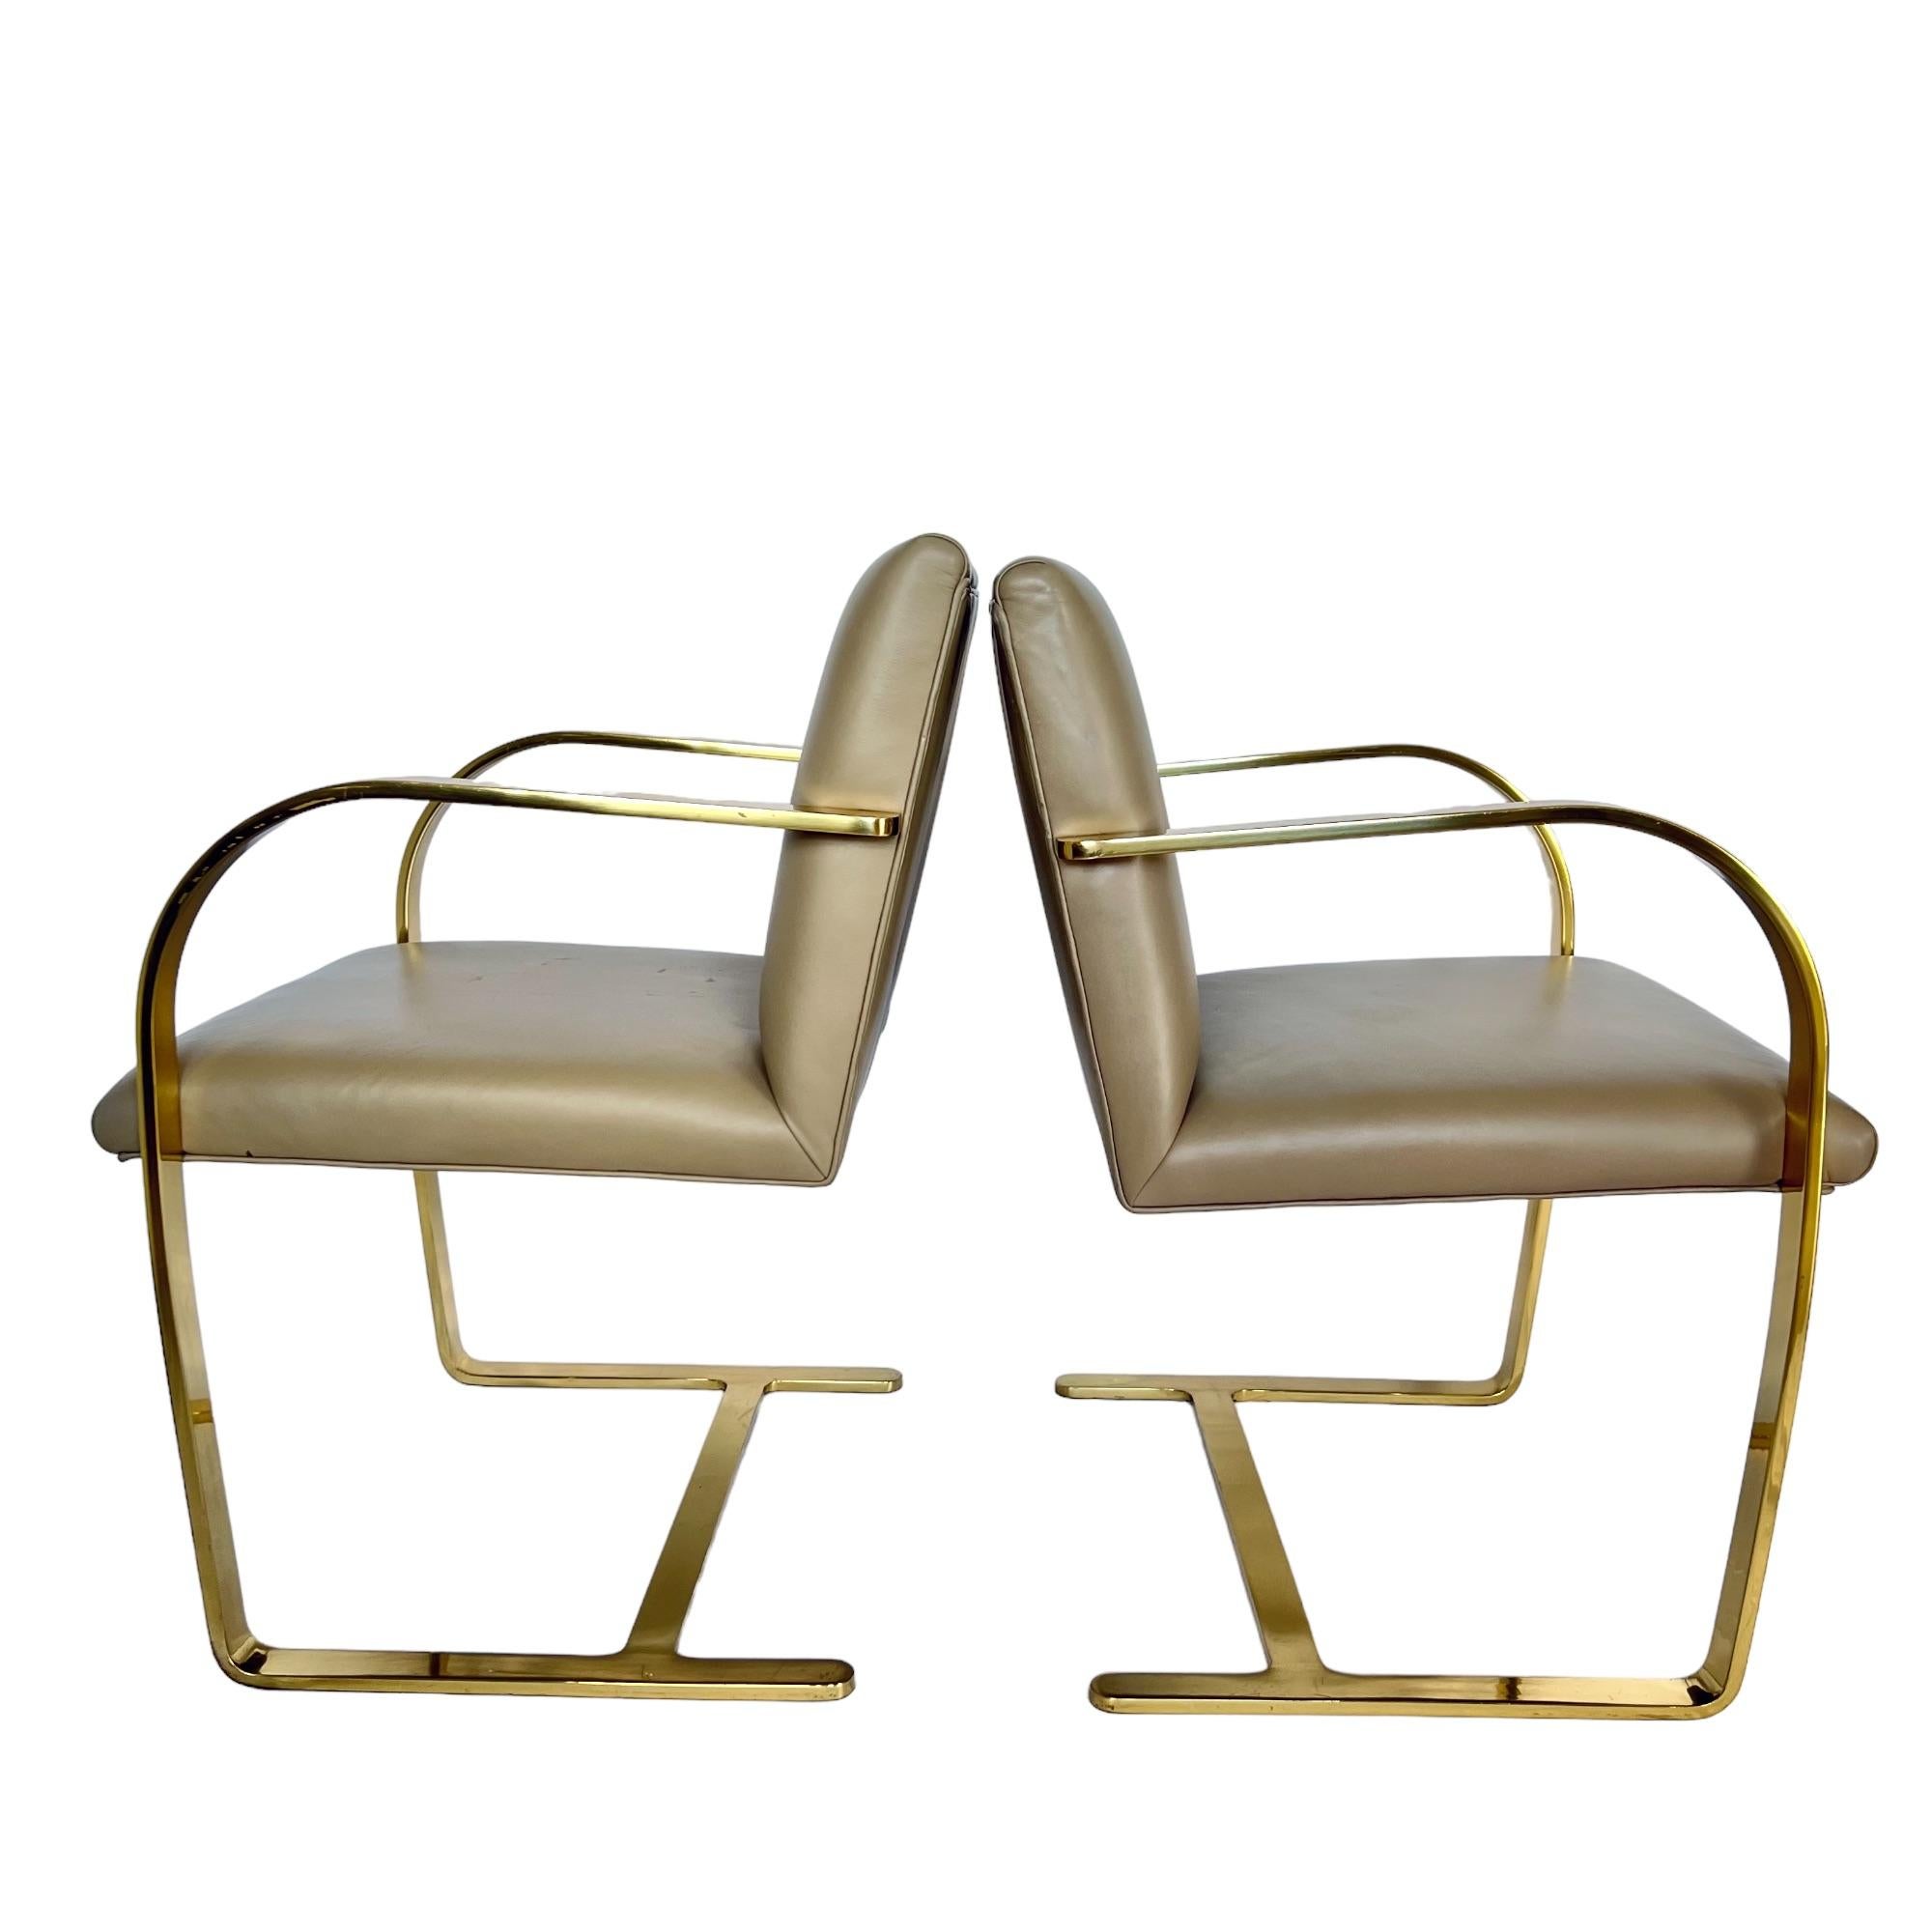 American Mies Van Der Rohe Brno Gold Brass Flat Bar Leather Chairs, a Pair